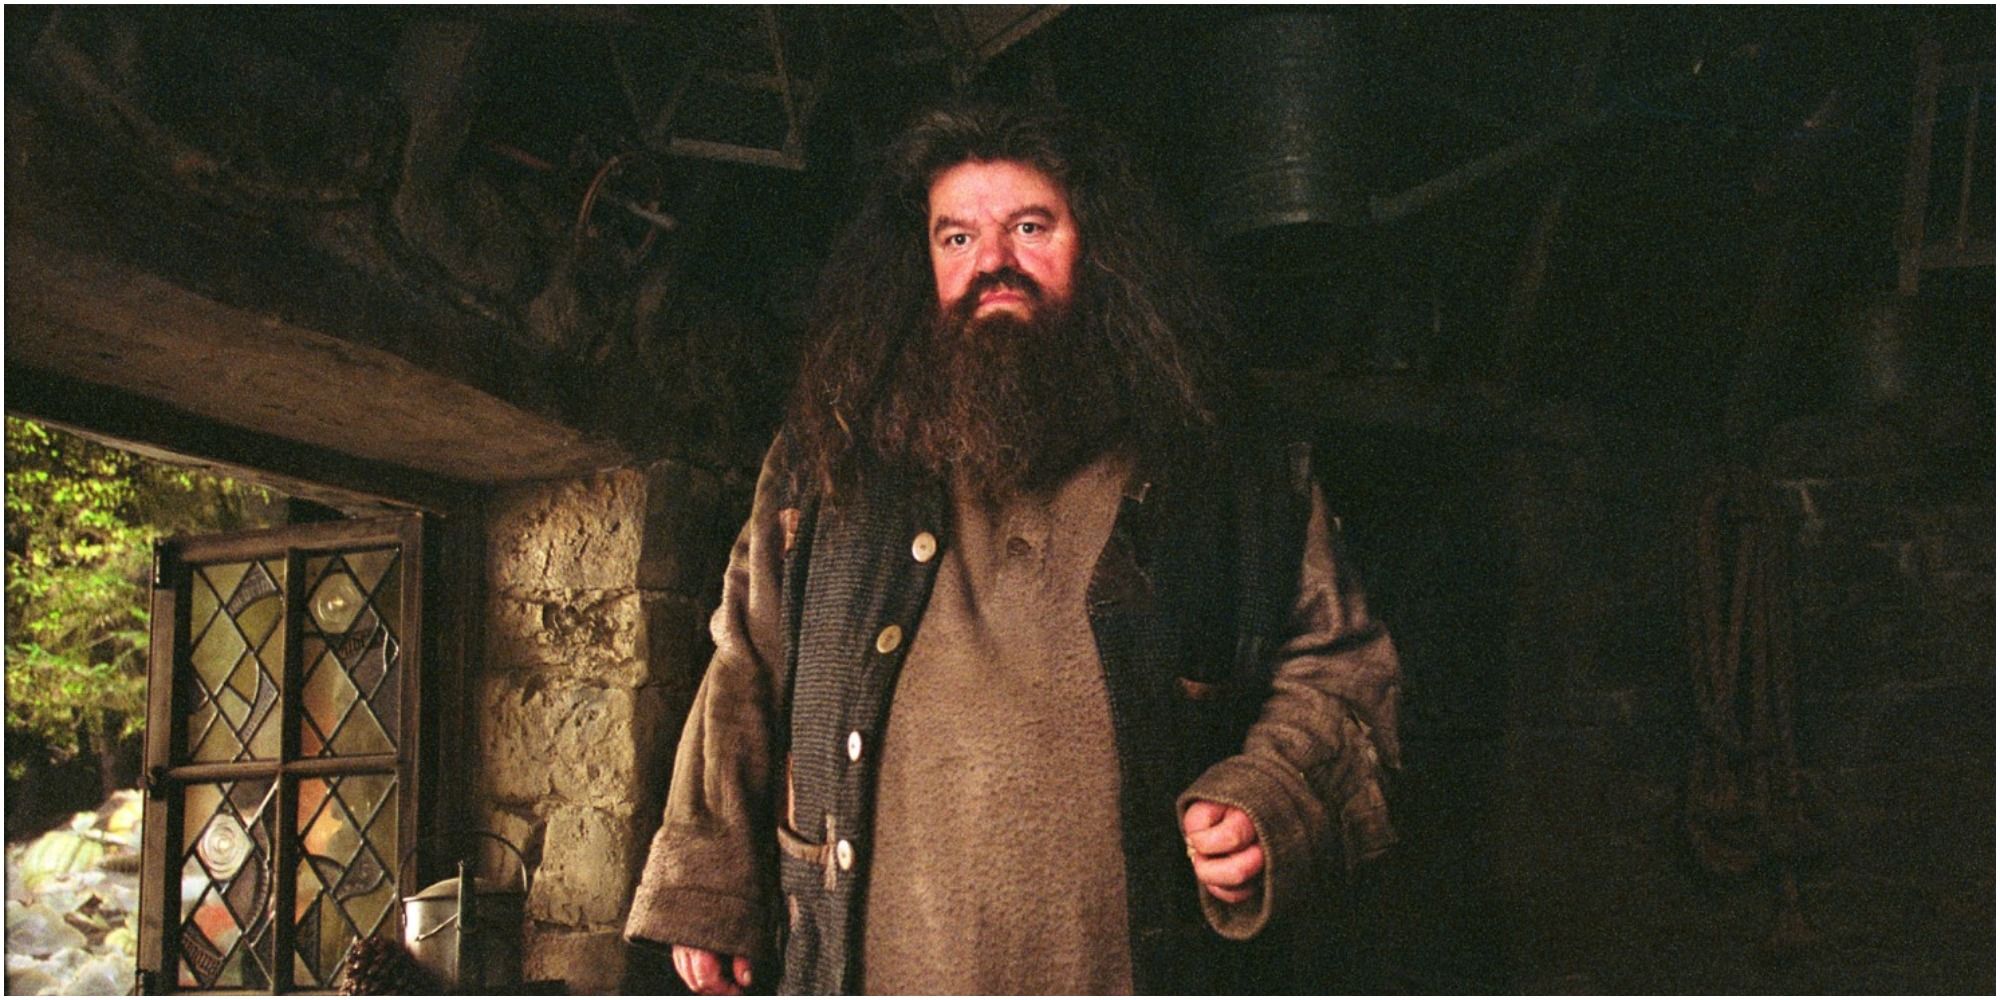 Hagrid standing in his hut in Harry Potter